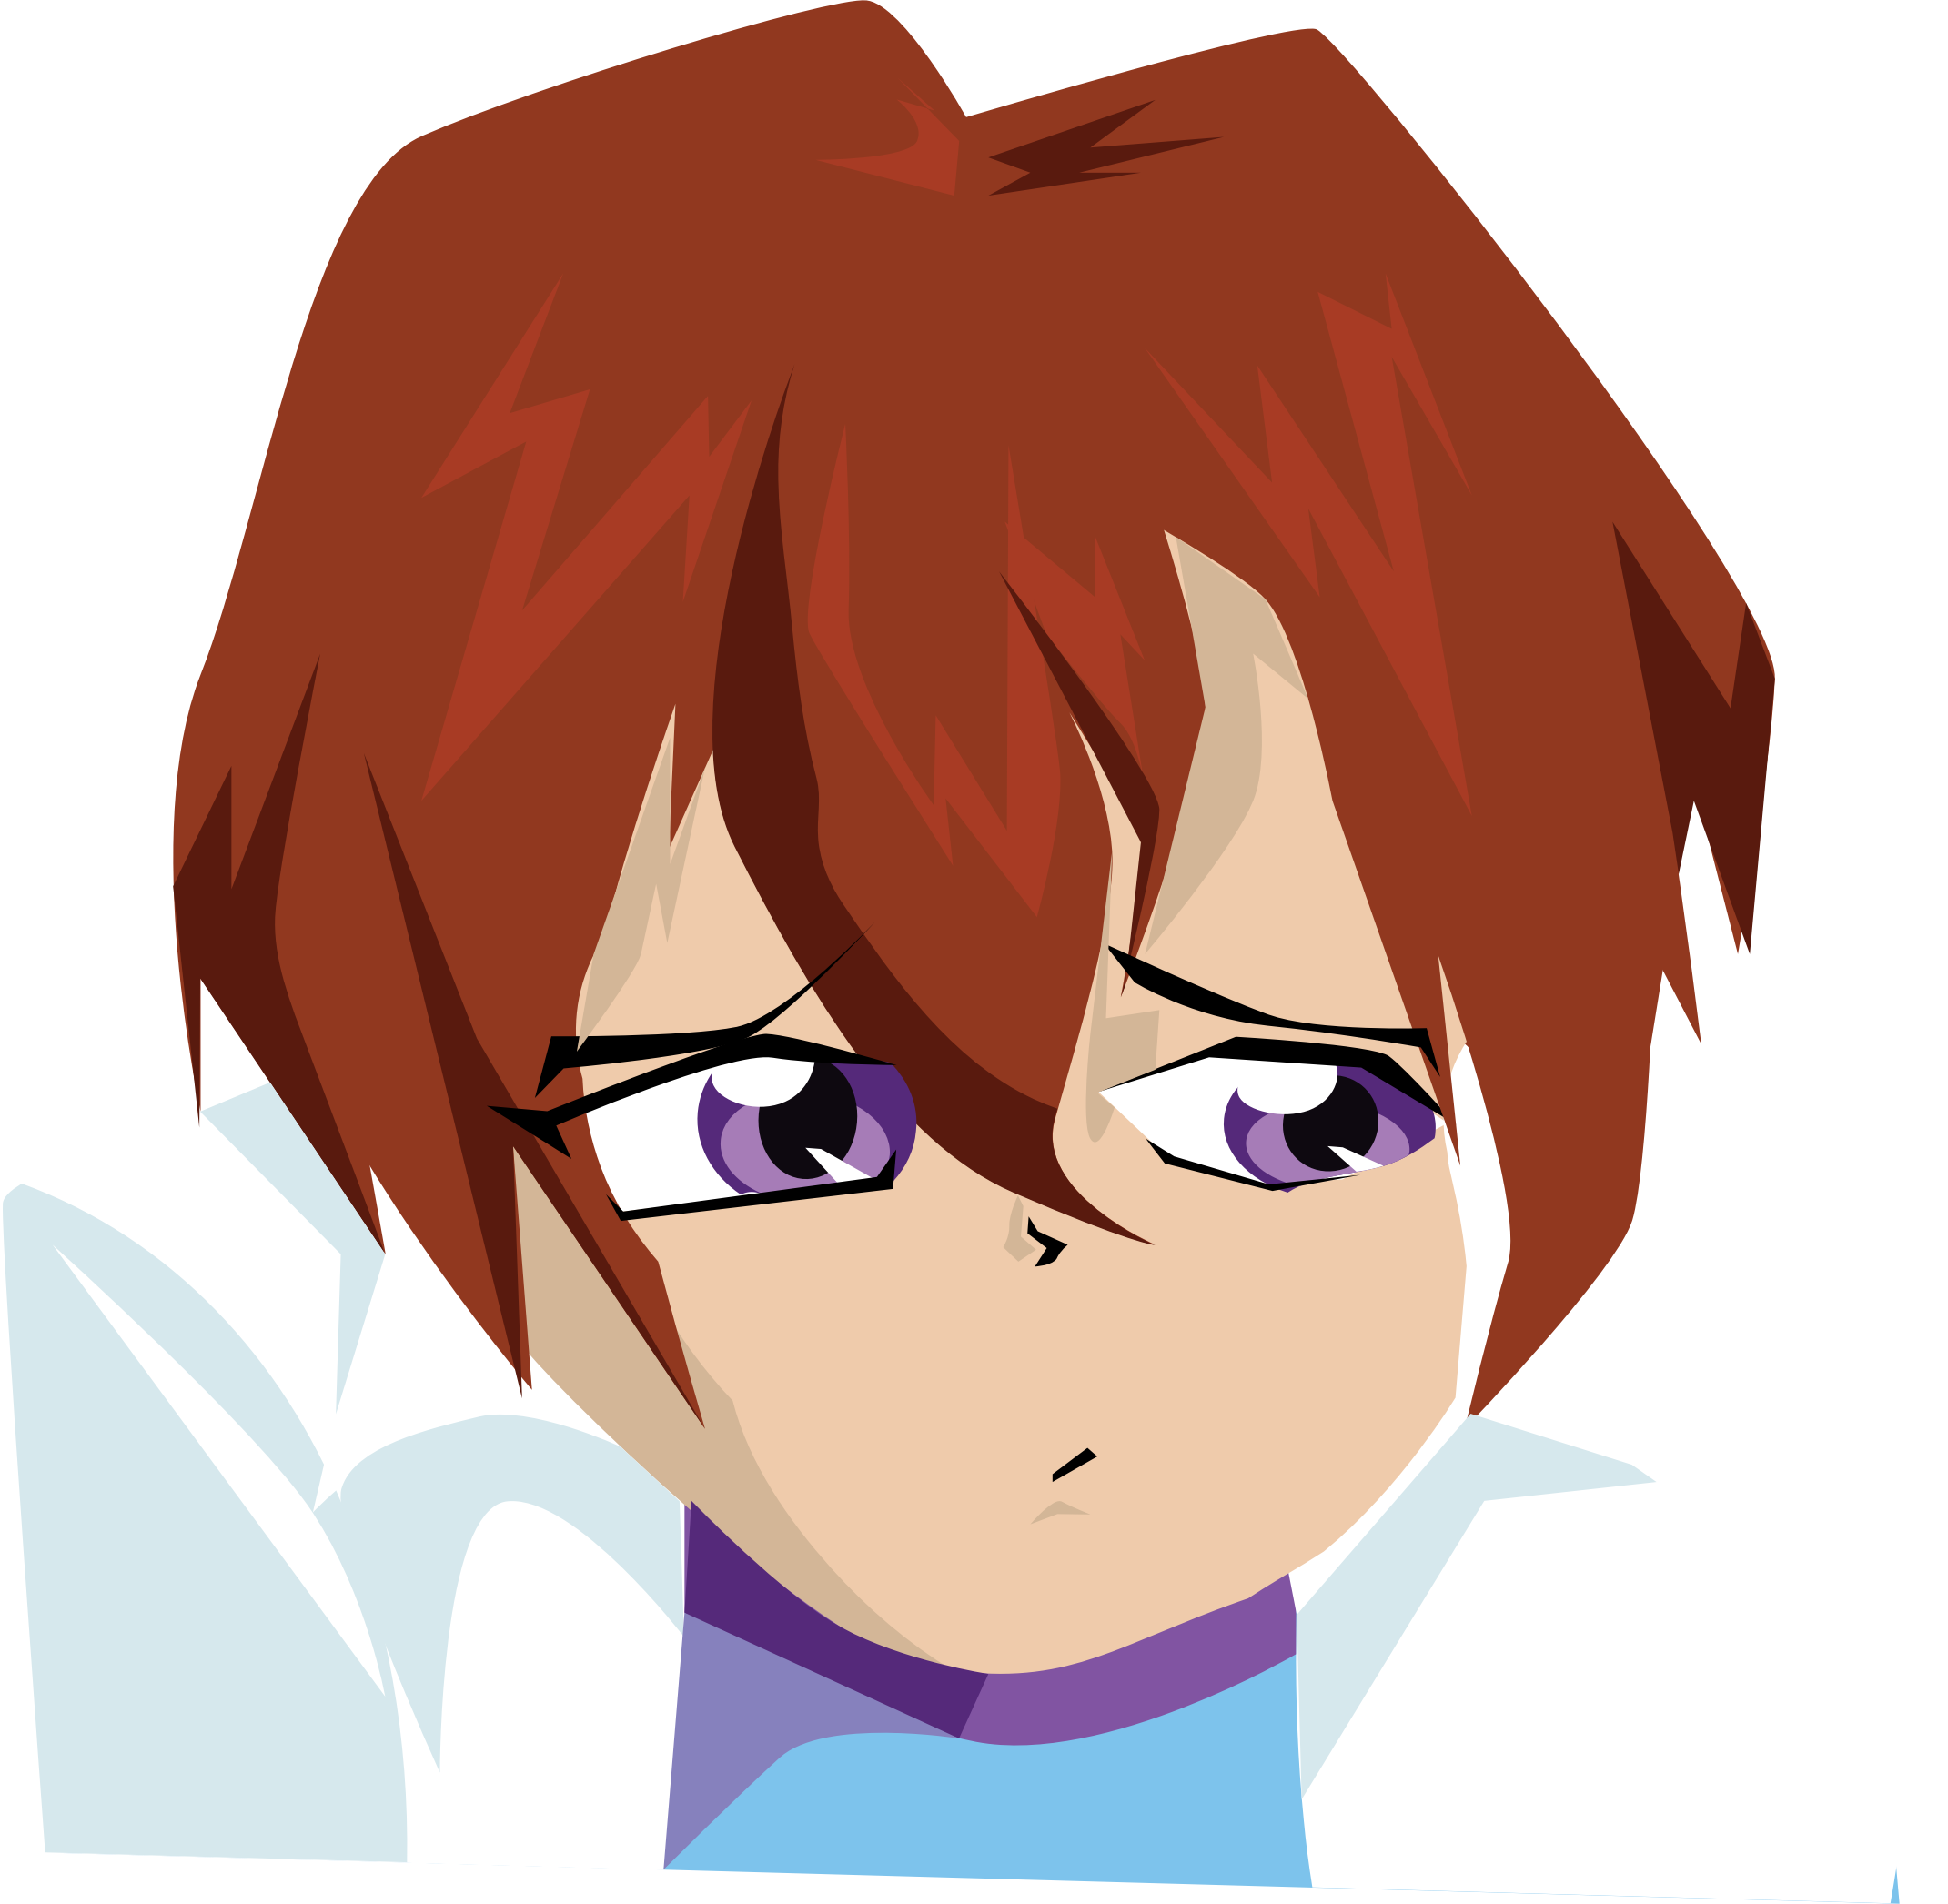 Sad Anime Boy Icons PNG - Free PNG and Icons Downloads